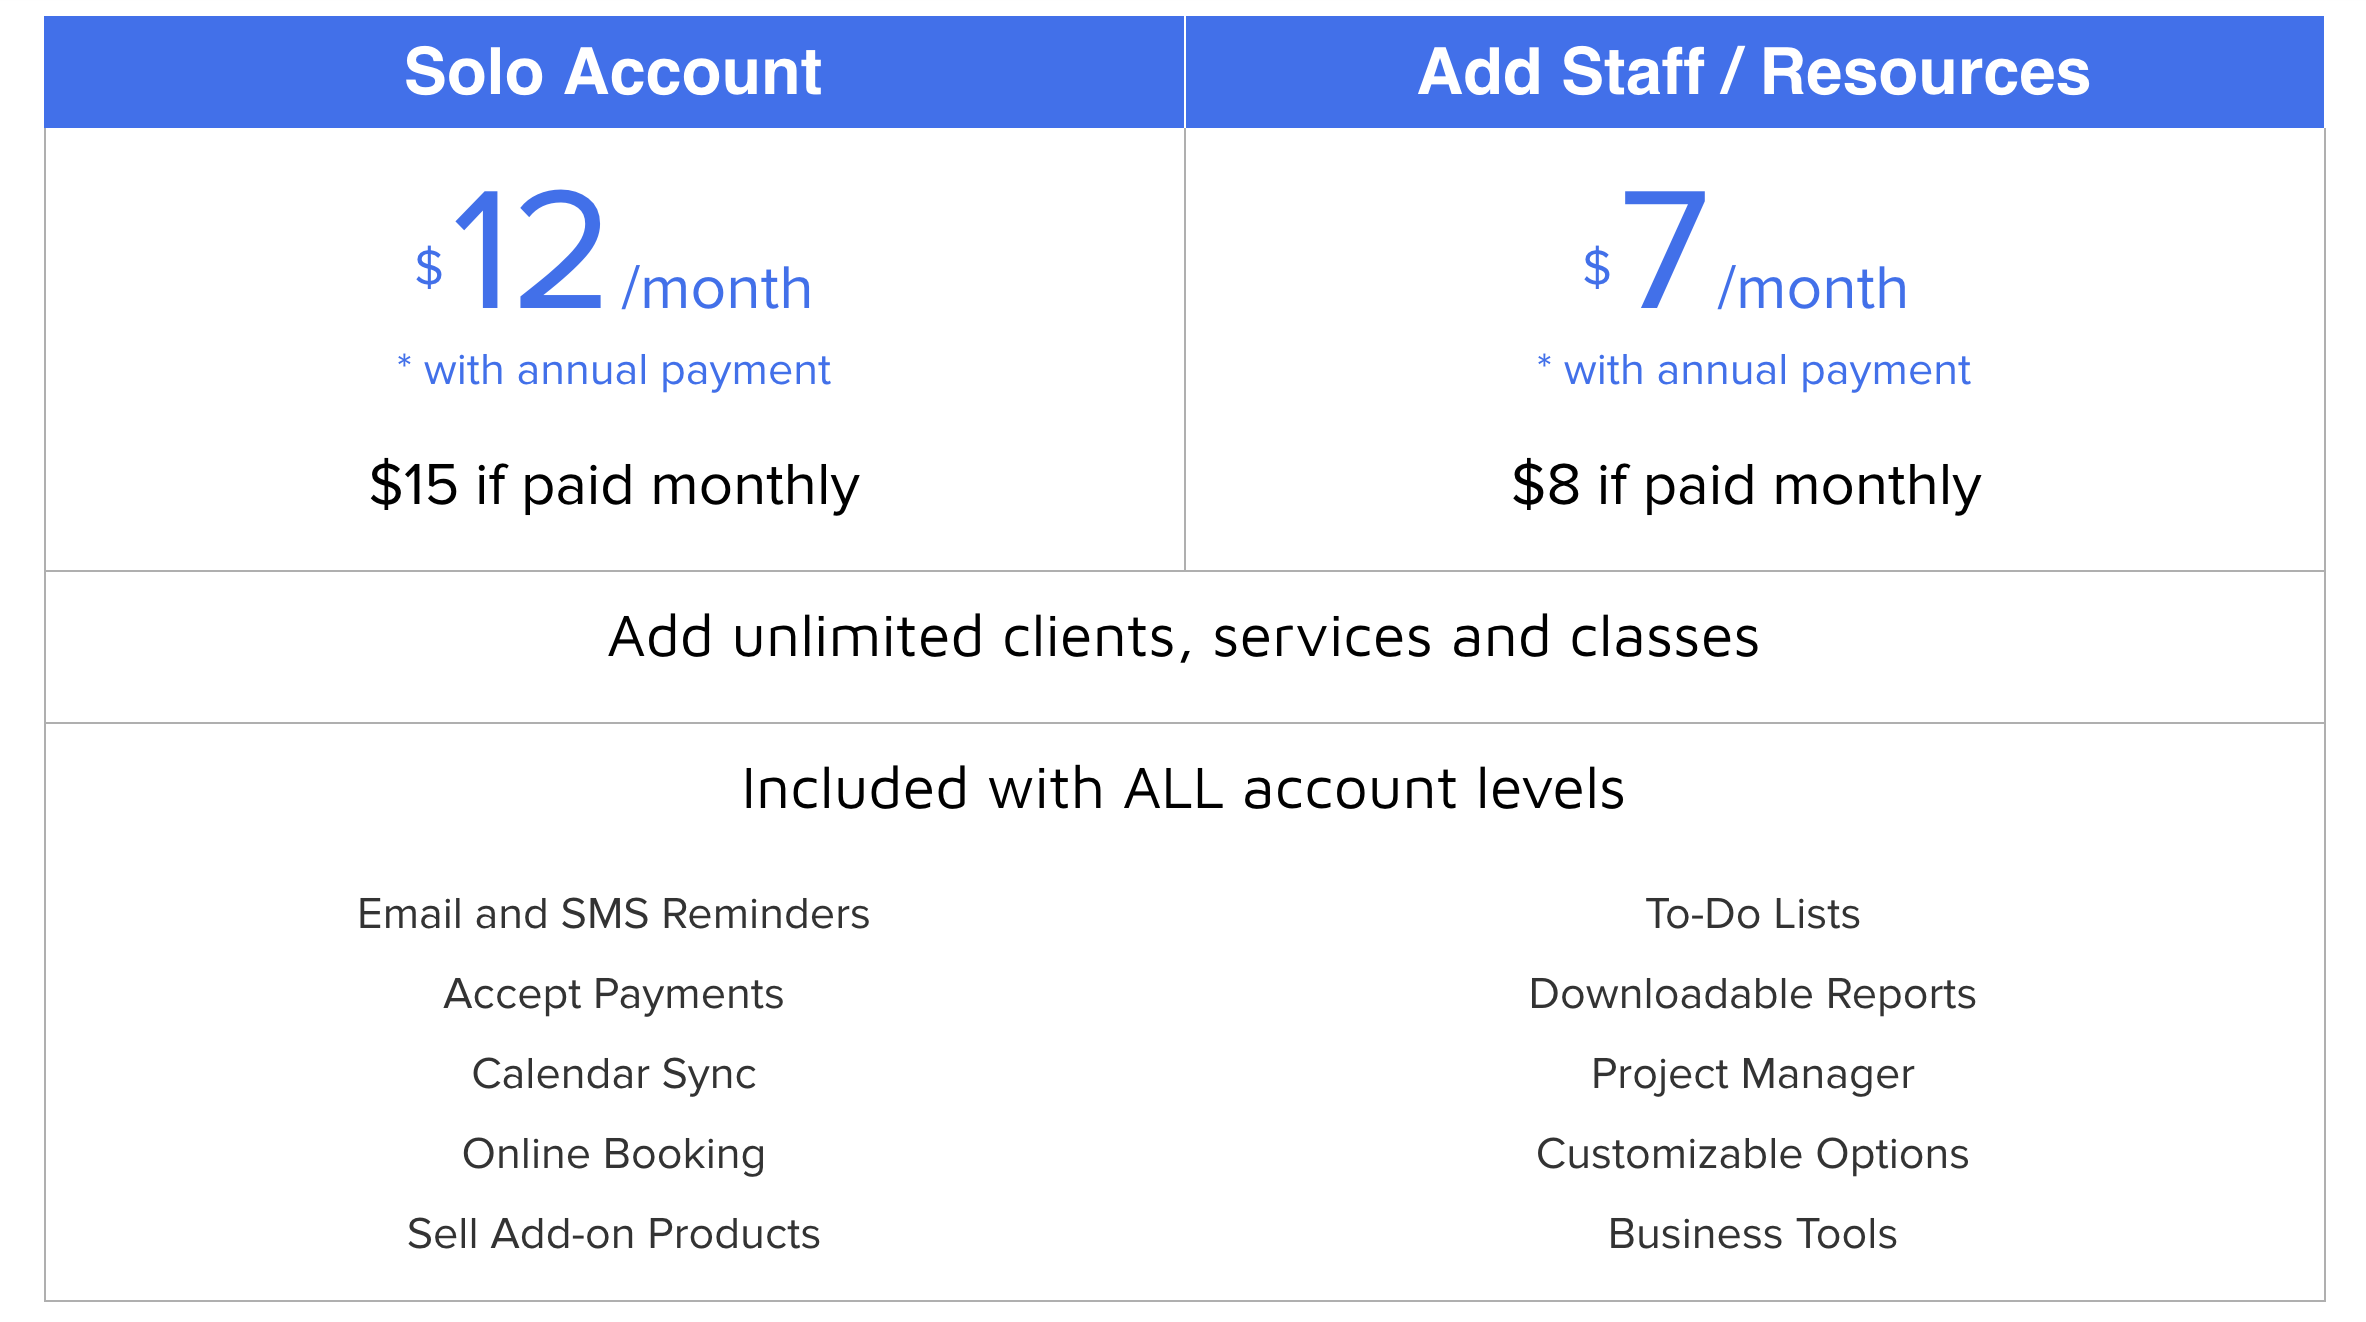 Pricing and Account Info